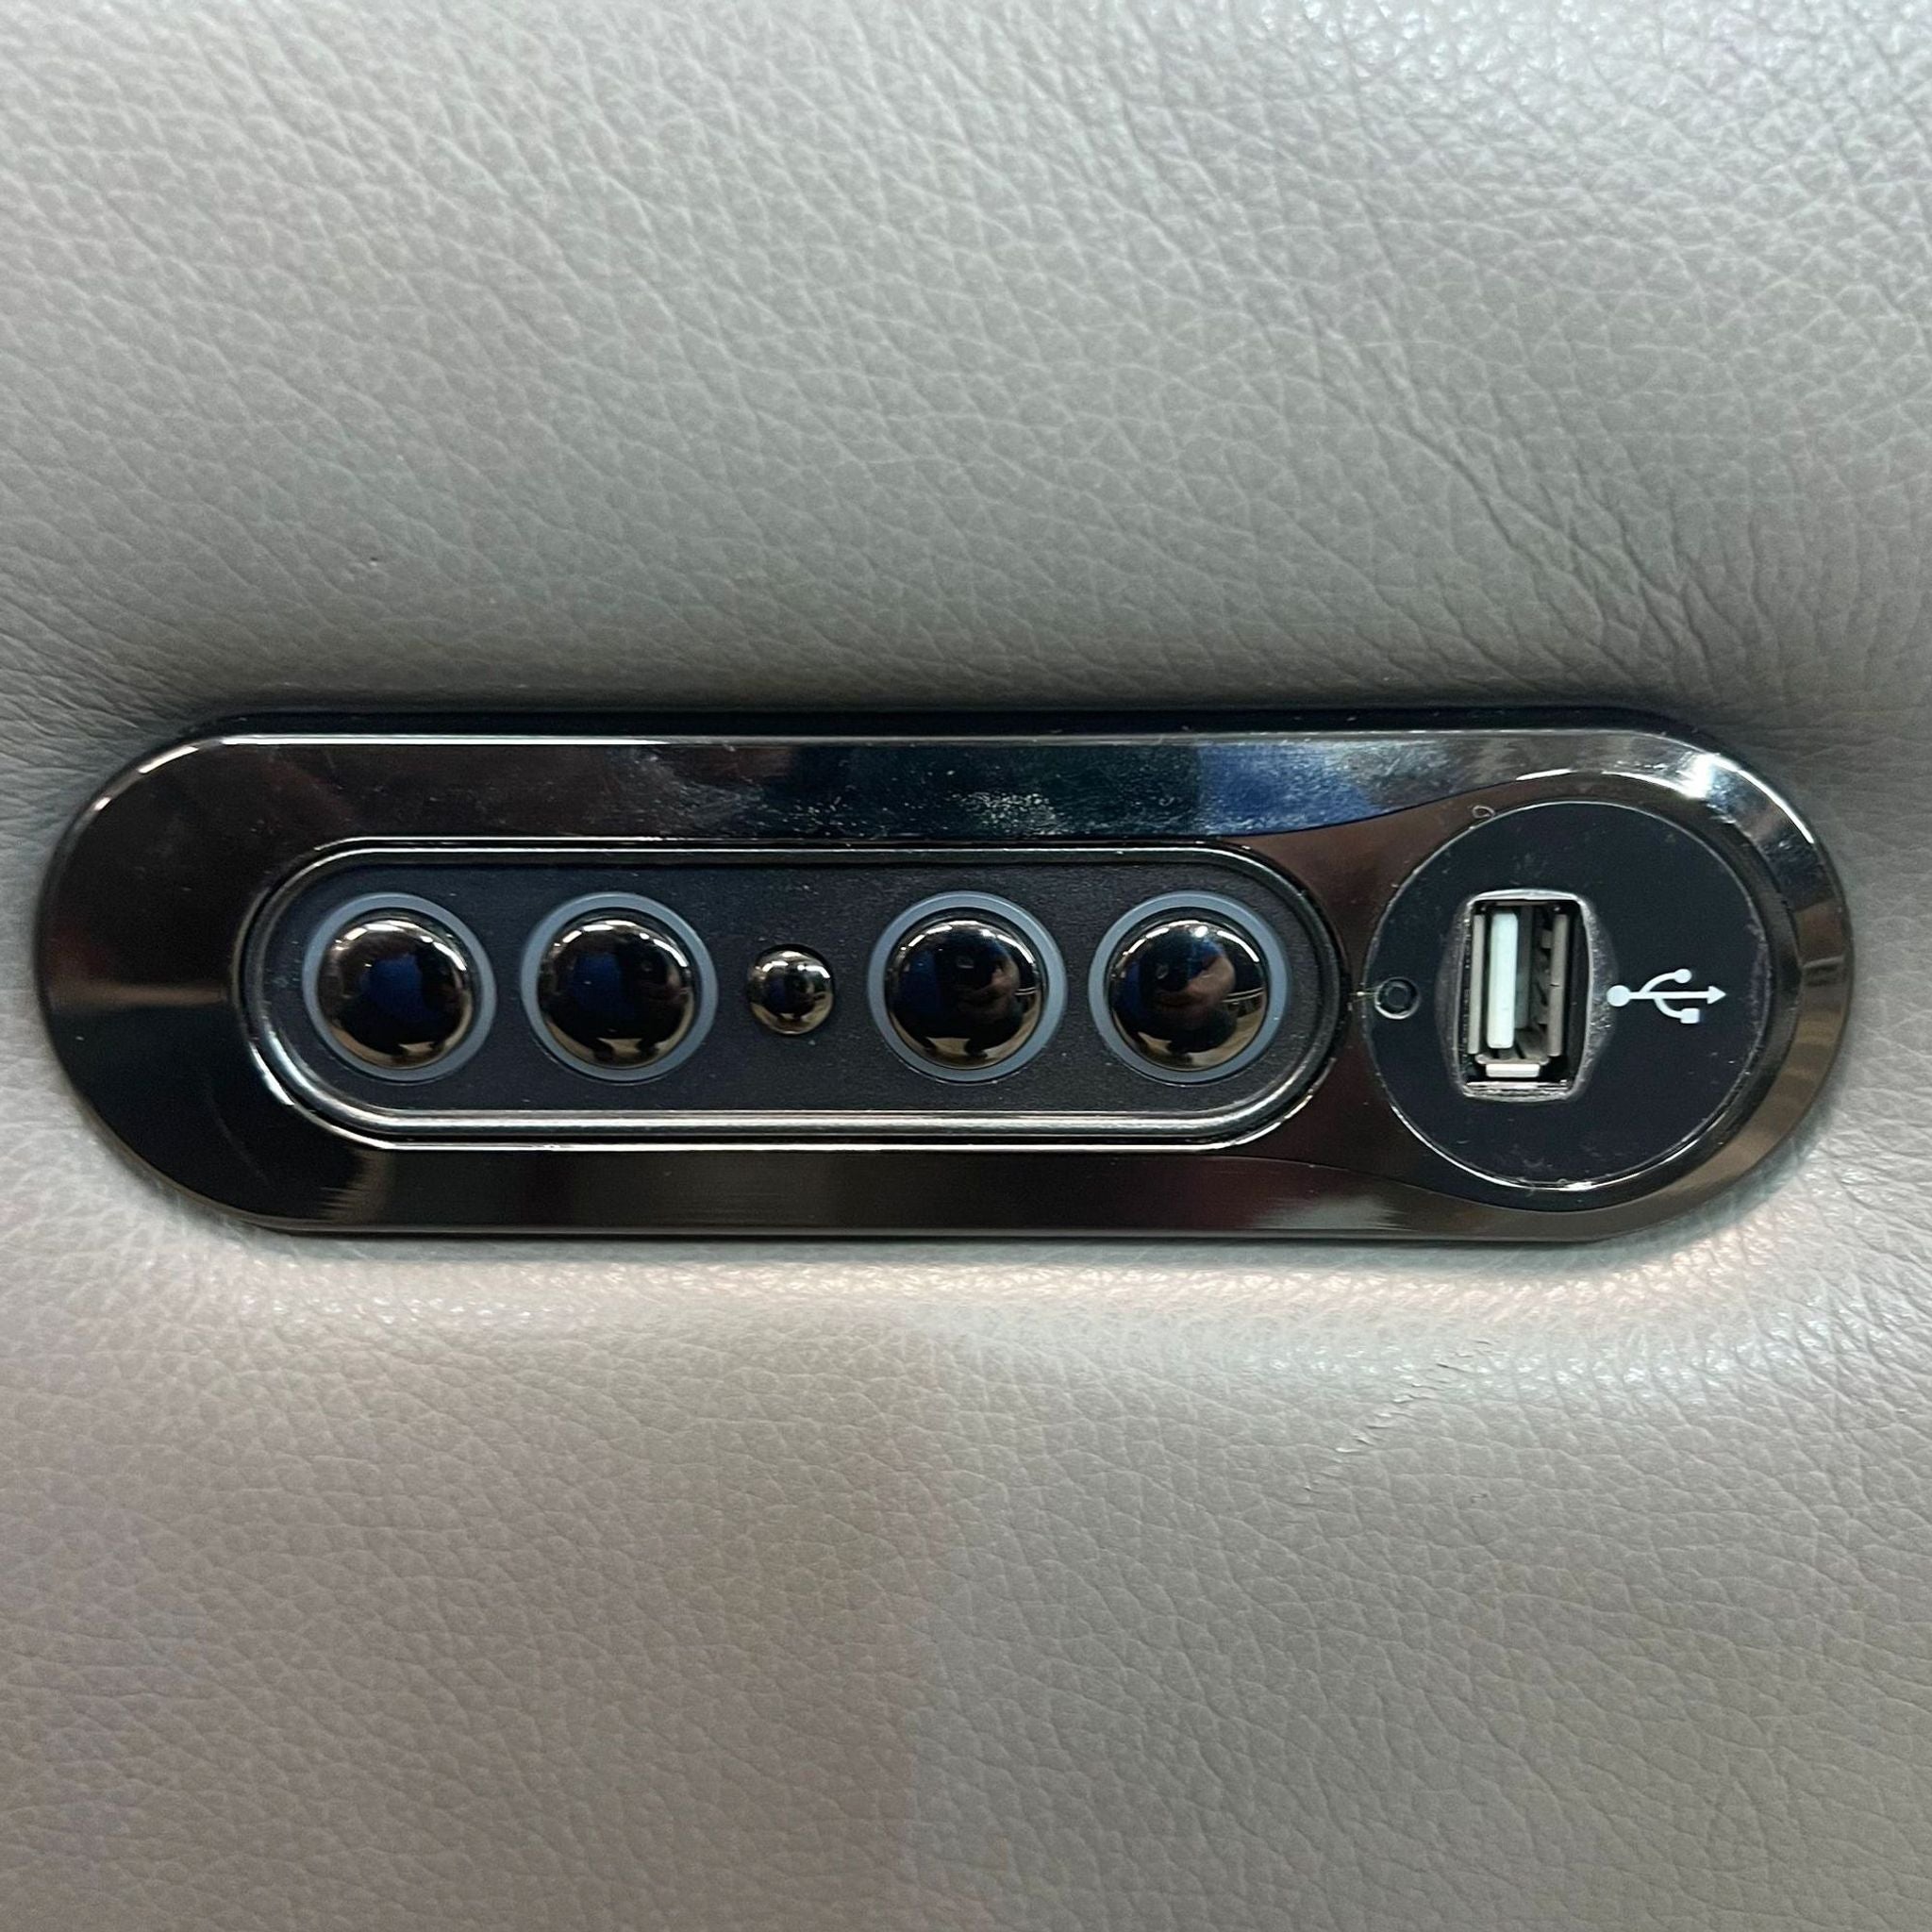 Close-up of a built-in USB port with controls on the Reperch grey leather loveseat.